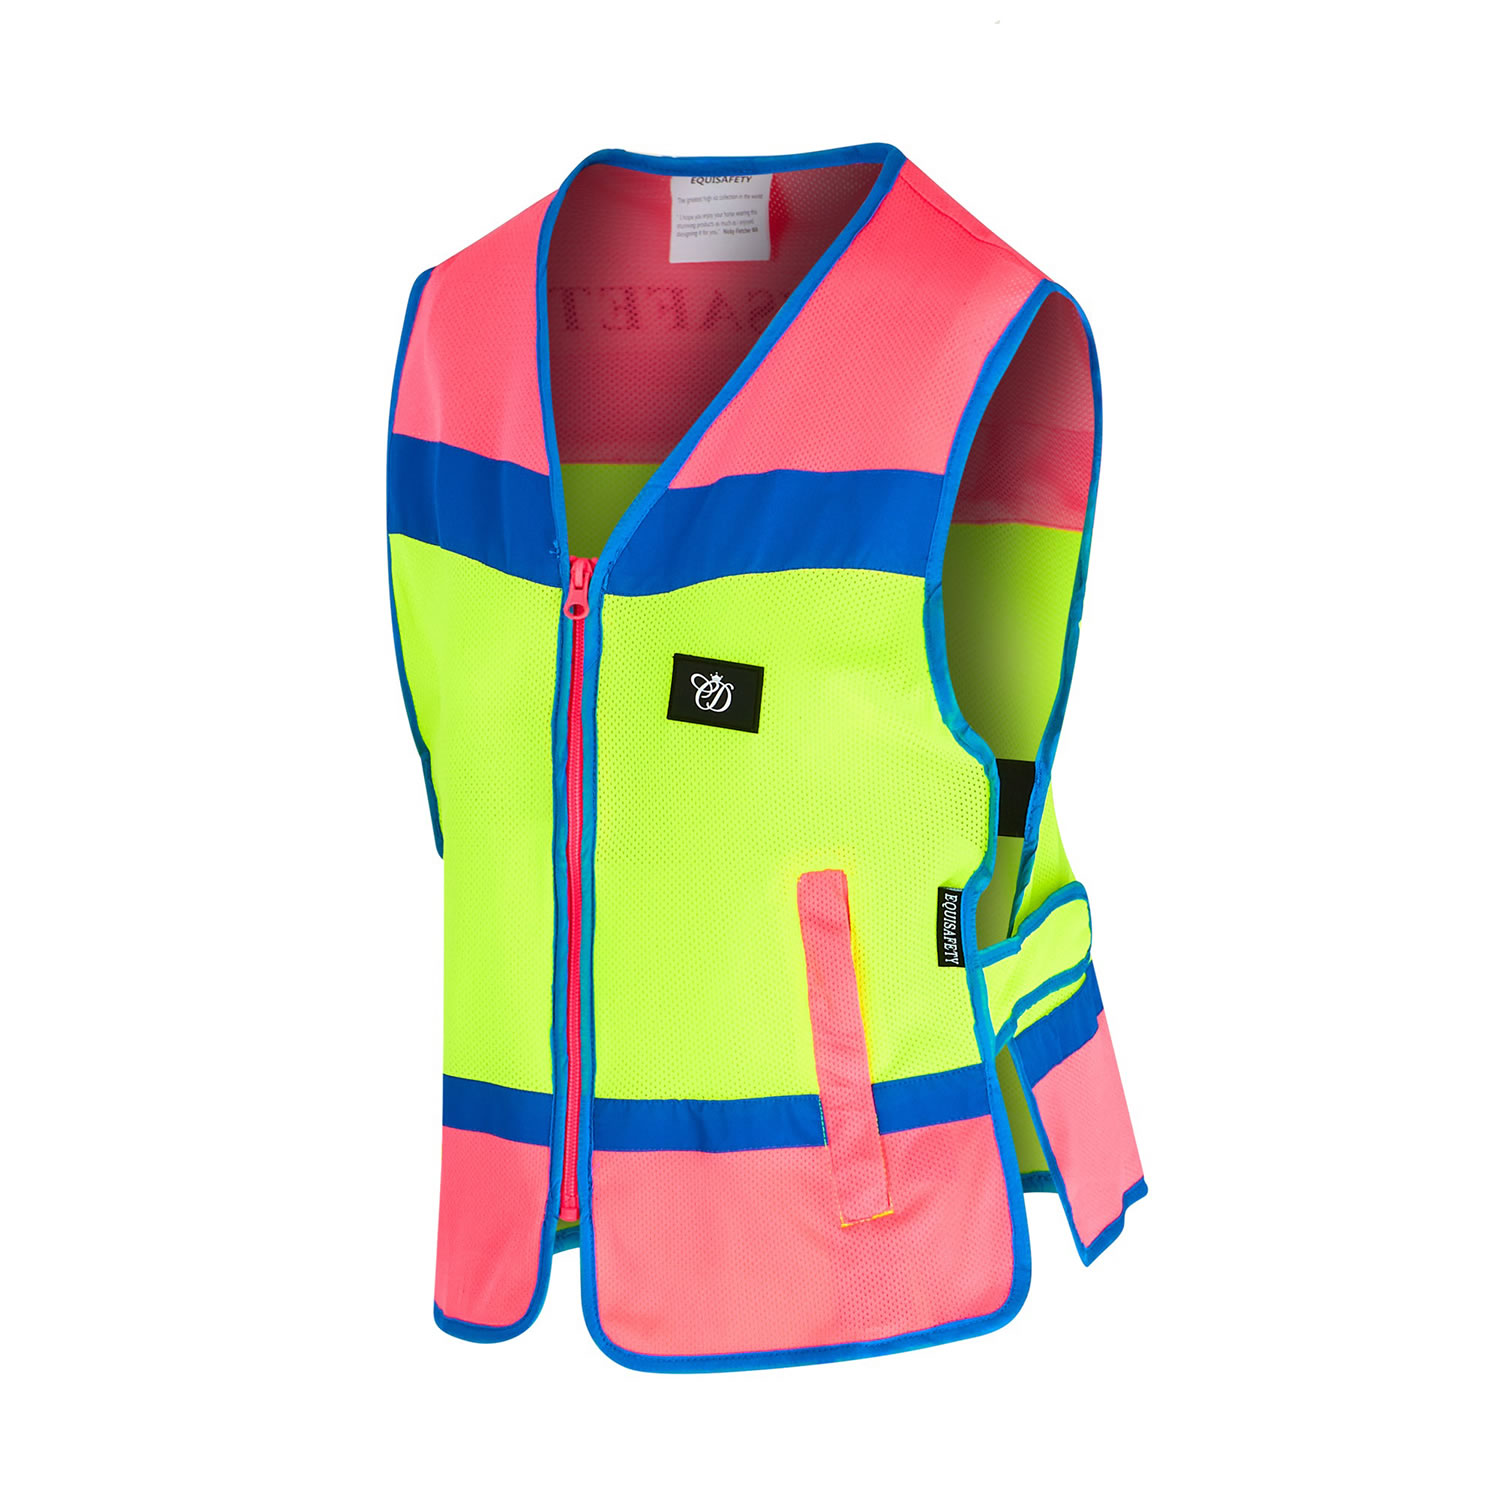 EQUISAFETY MULTICOLOURED WAISTCOAT PINK/YELLOW CHILDS (4 - 8 YRS) 4 - 8 YRS CHILDS